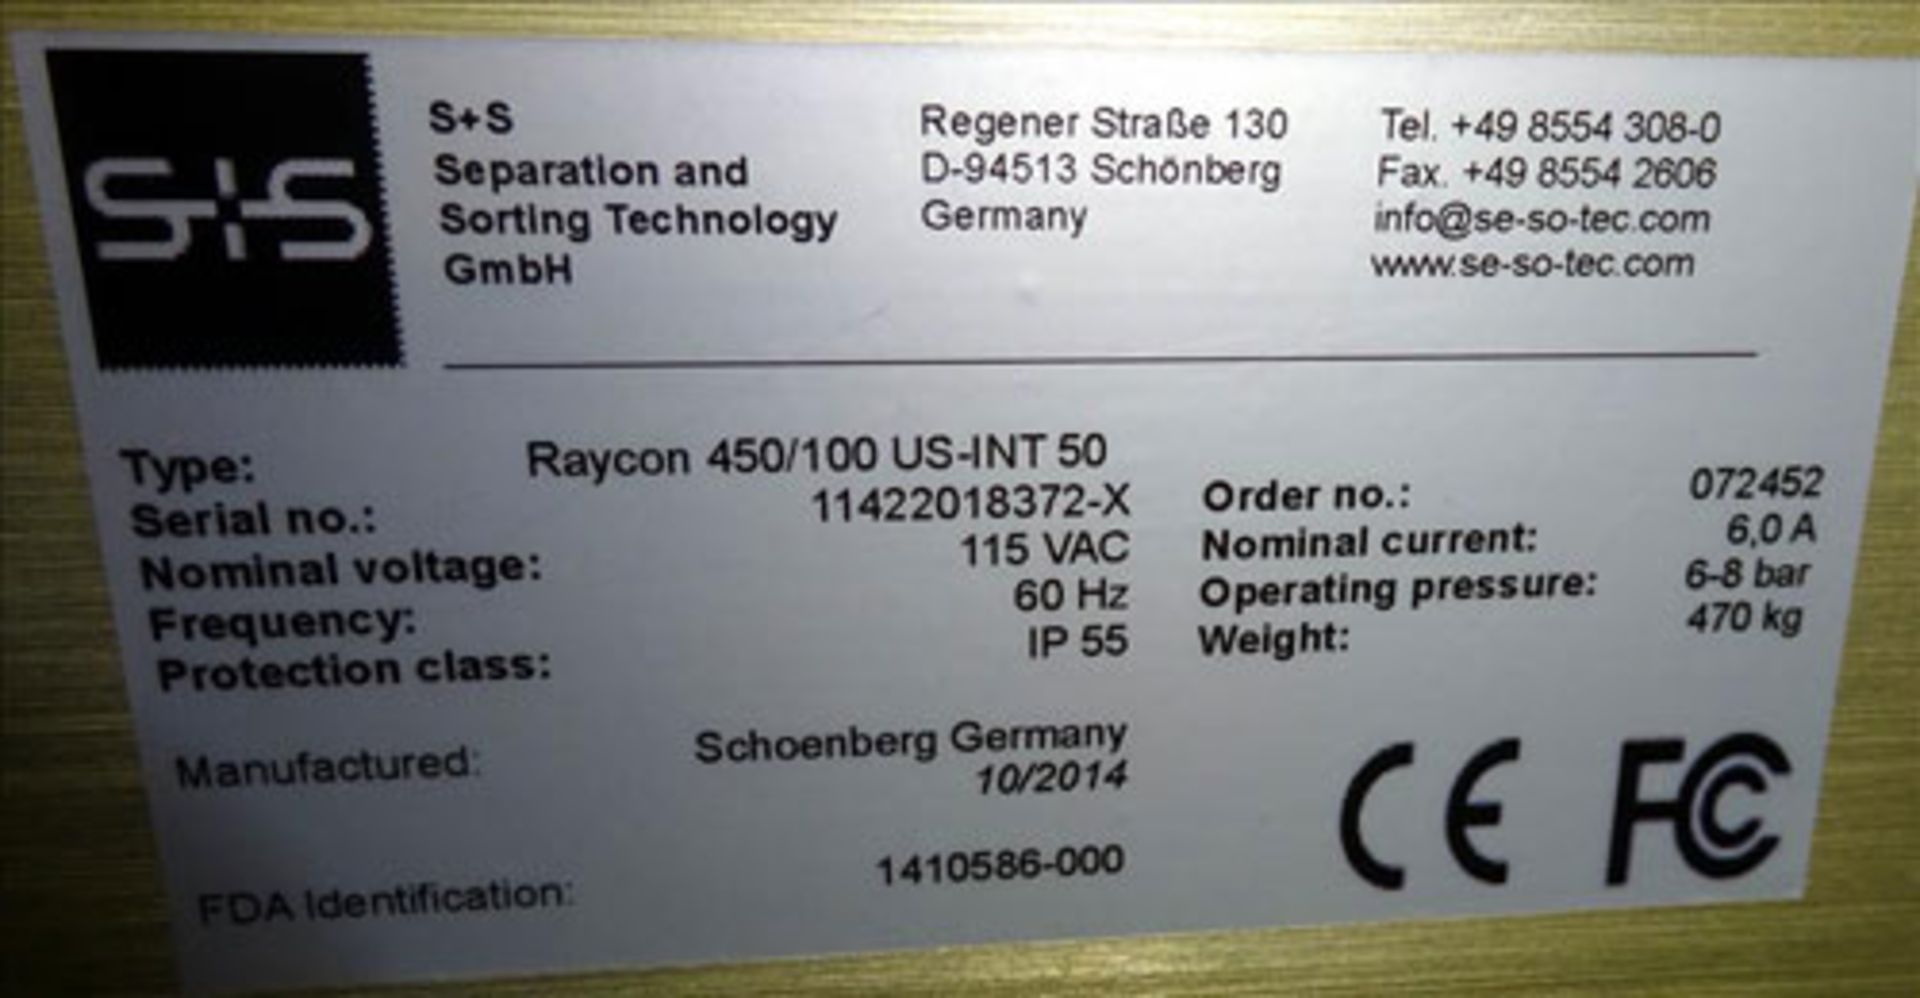 Sesotec Raycon X-Ray Food Inspection System, Type 450/100 US-INT 50. Serial # 11422018372-X. Has - Image 30 of 37